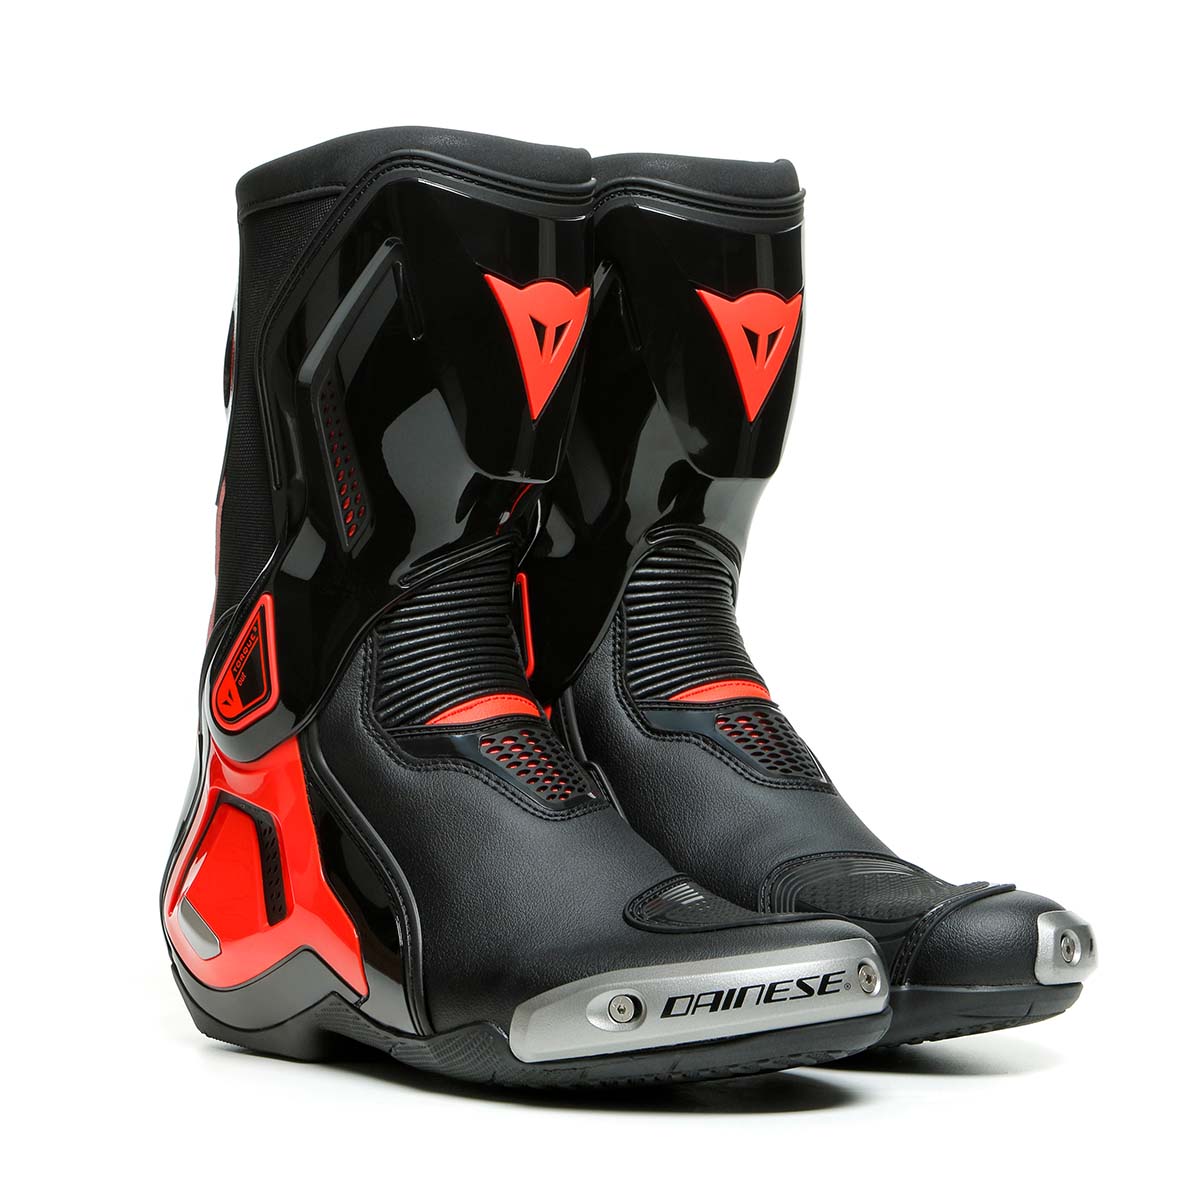 TORQUE 3 OUT BOOTS – Ridelah